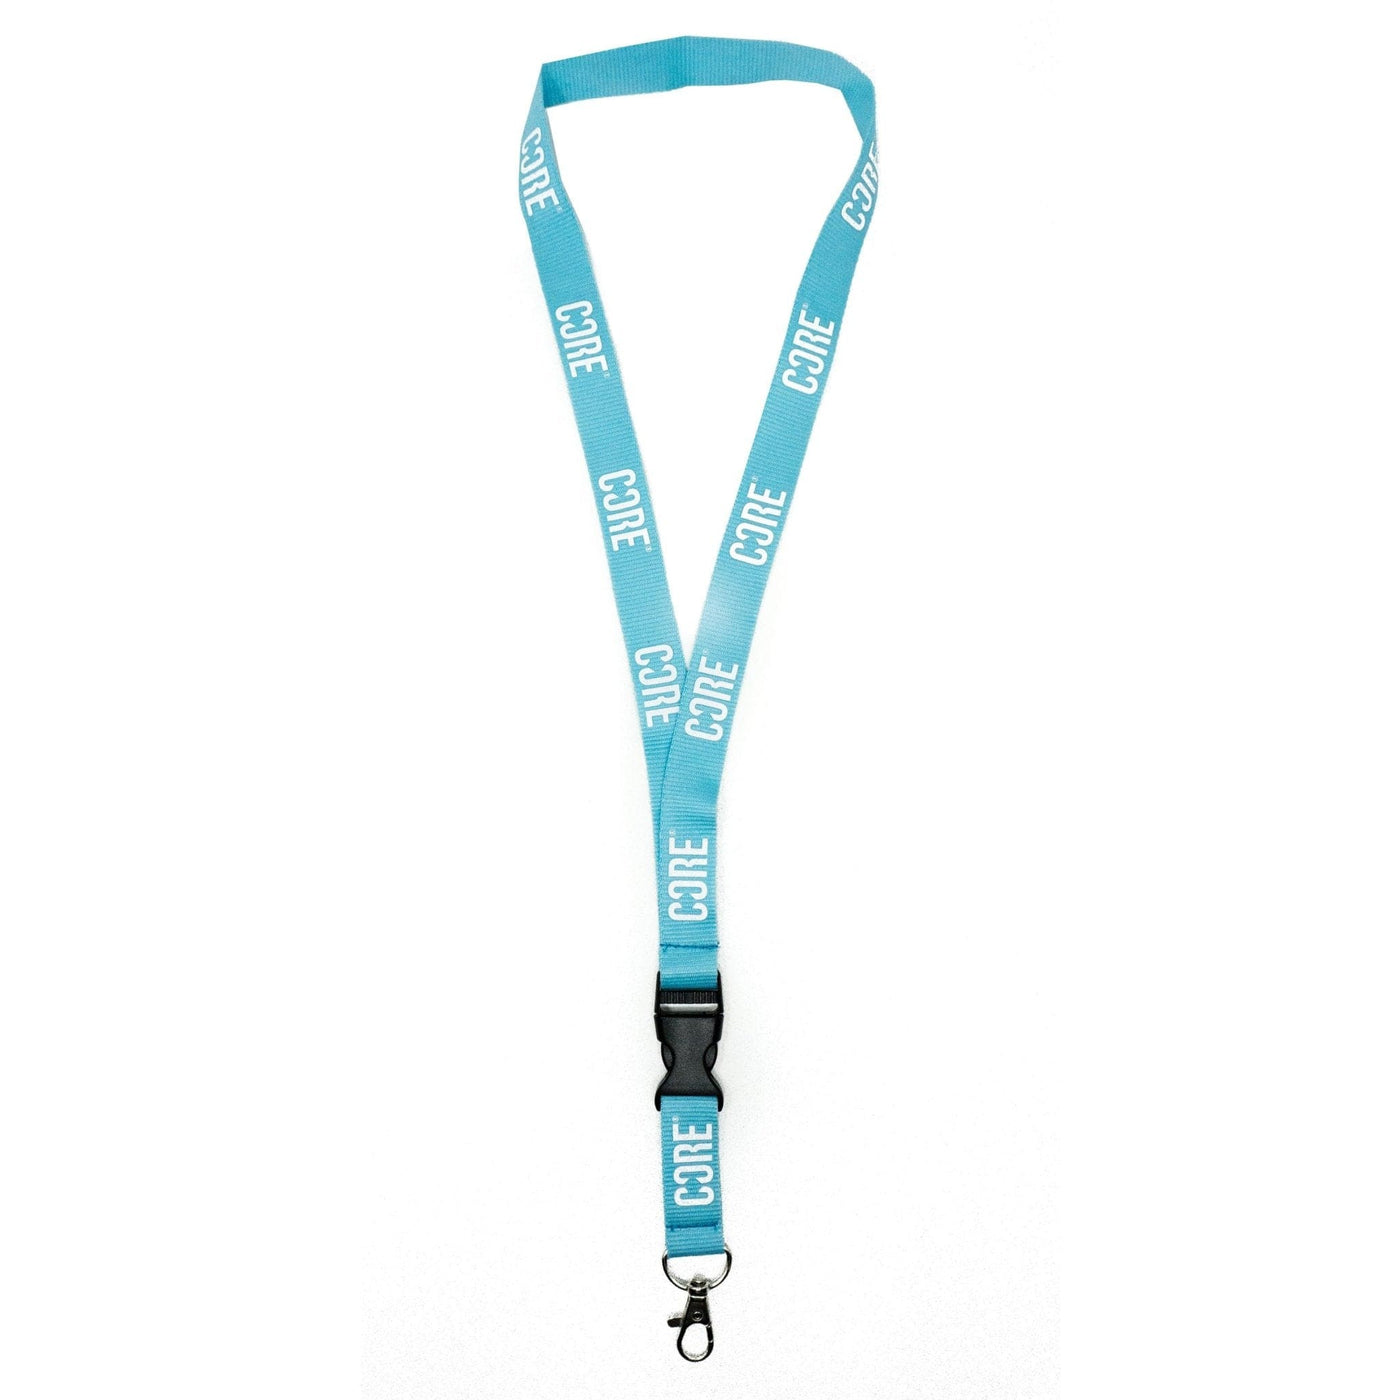 CORE Lanyard Keychain - Blue/White - CORE Protection